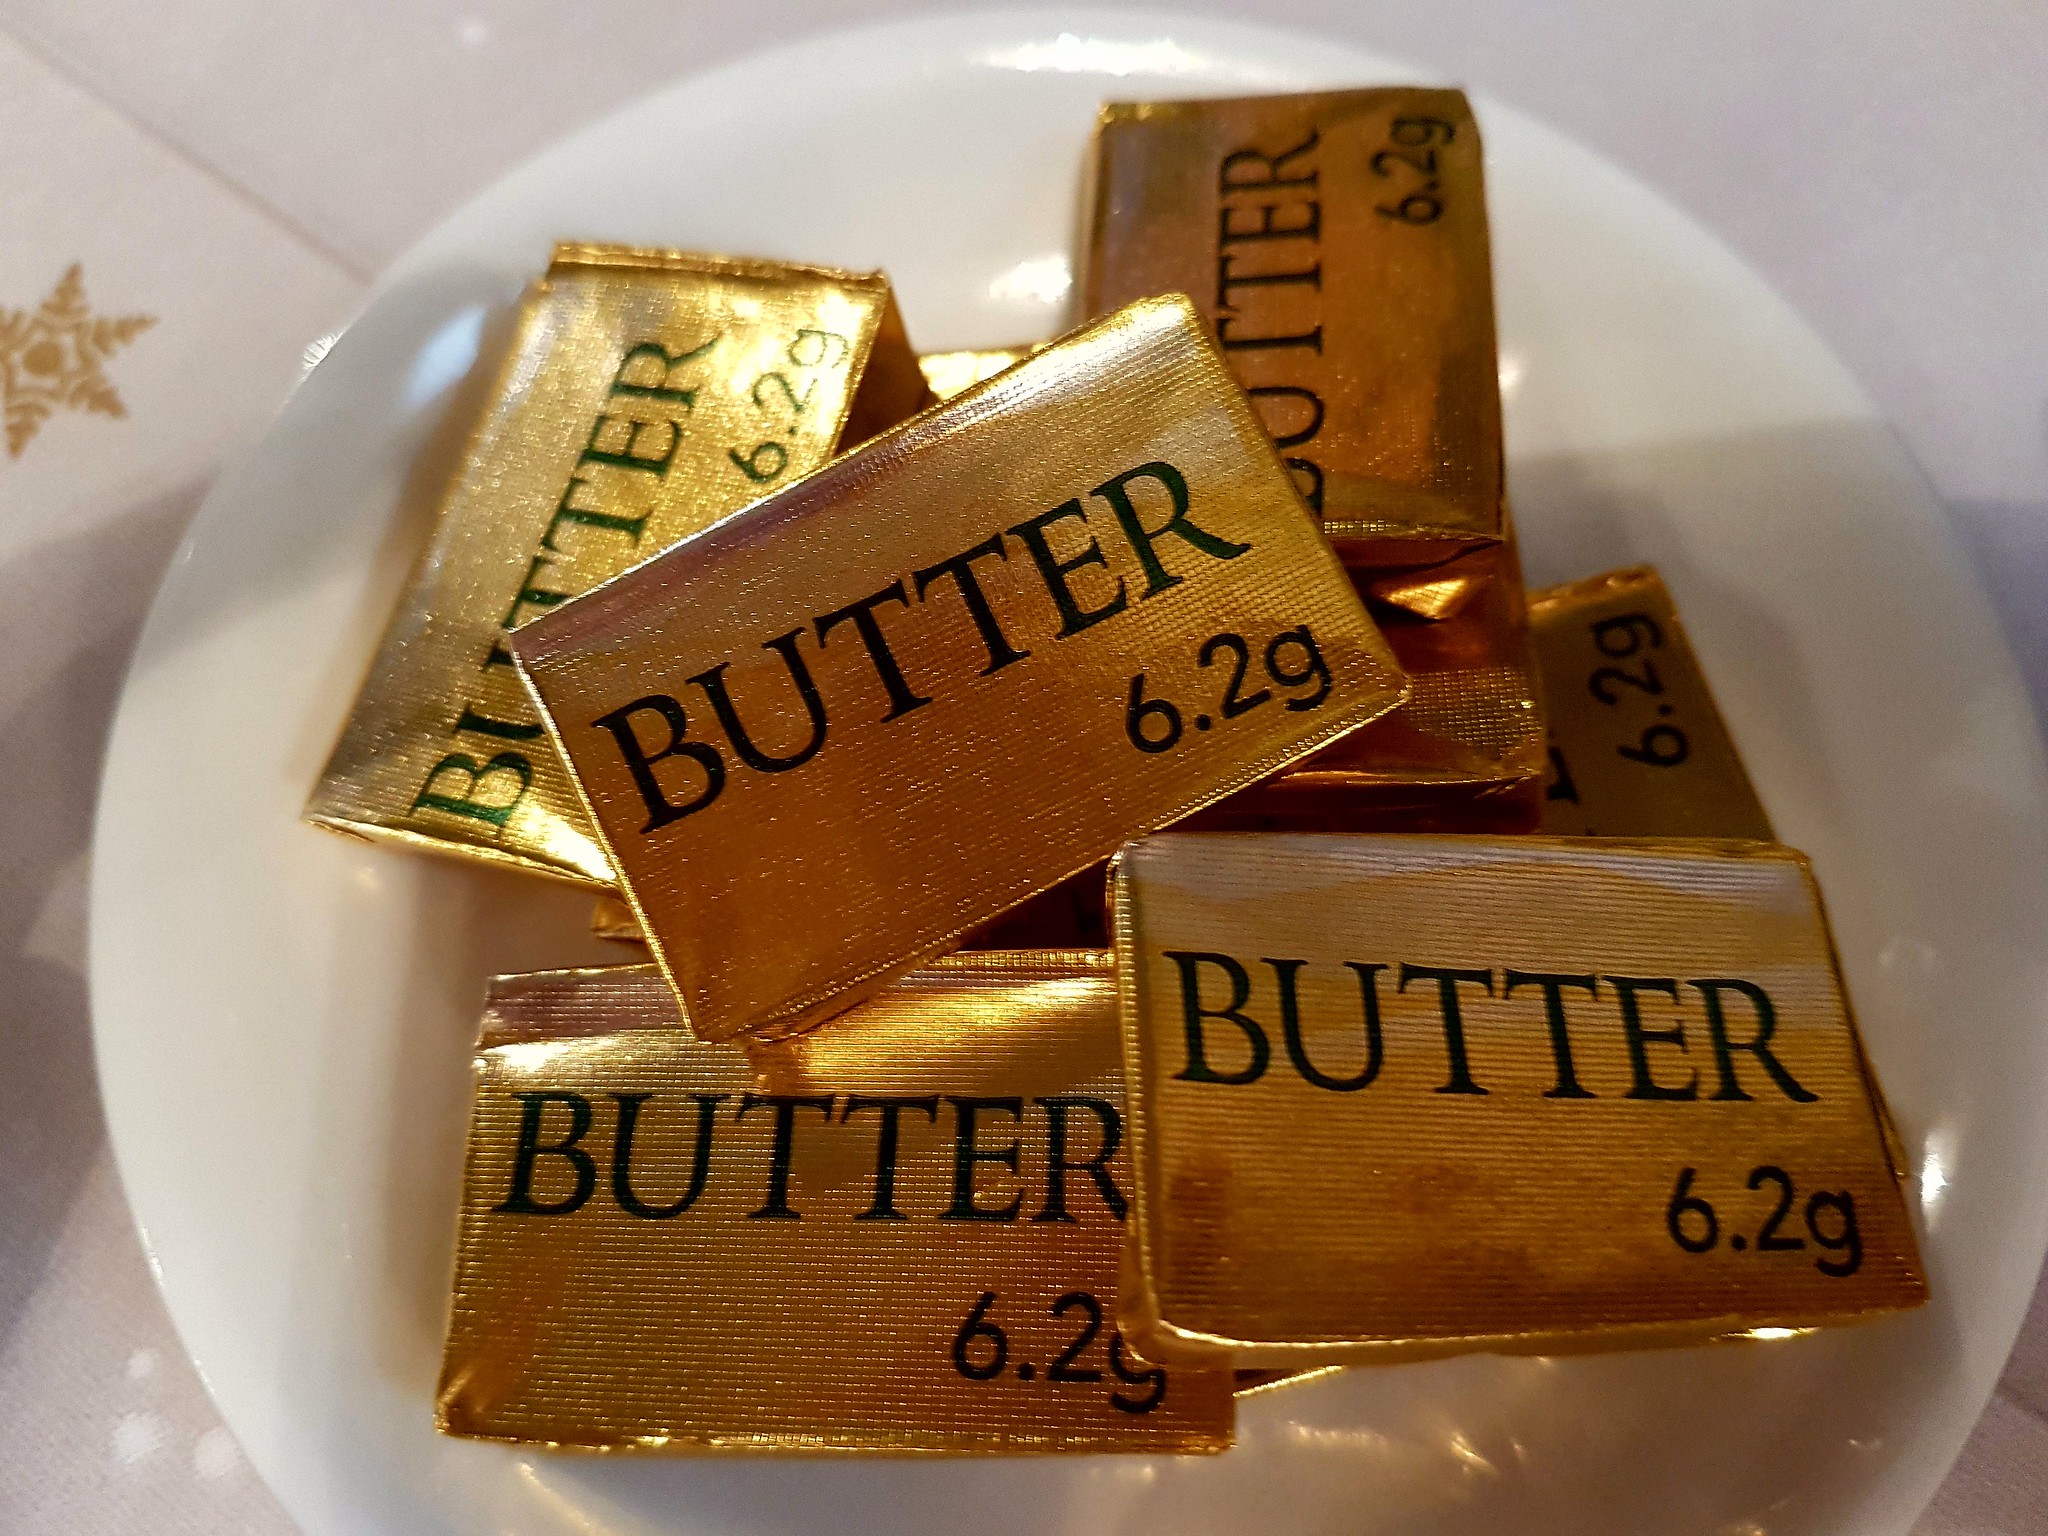 Photo of Butter by Oatsy40.